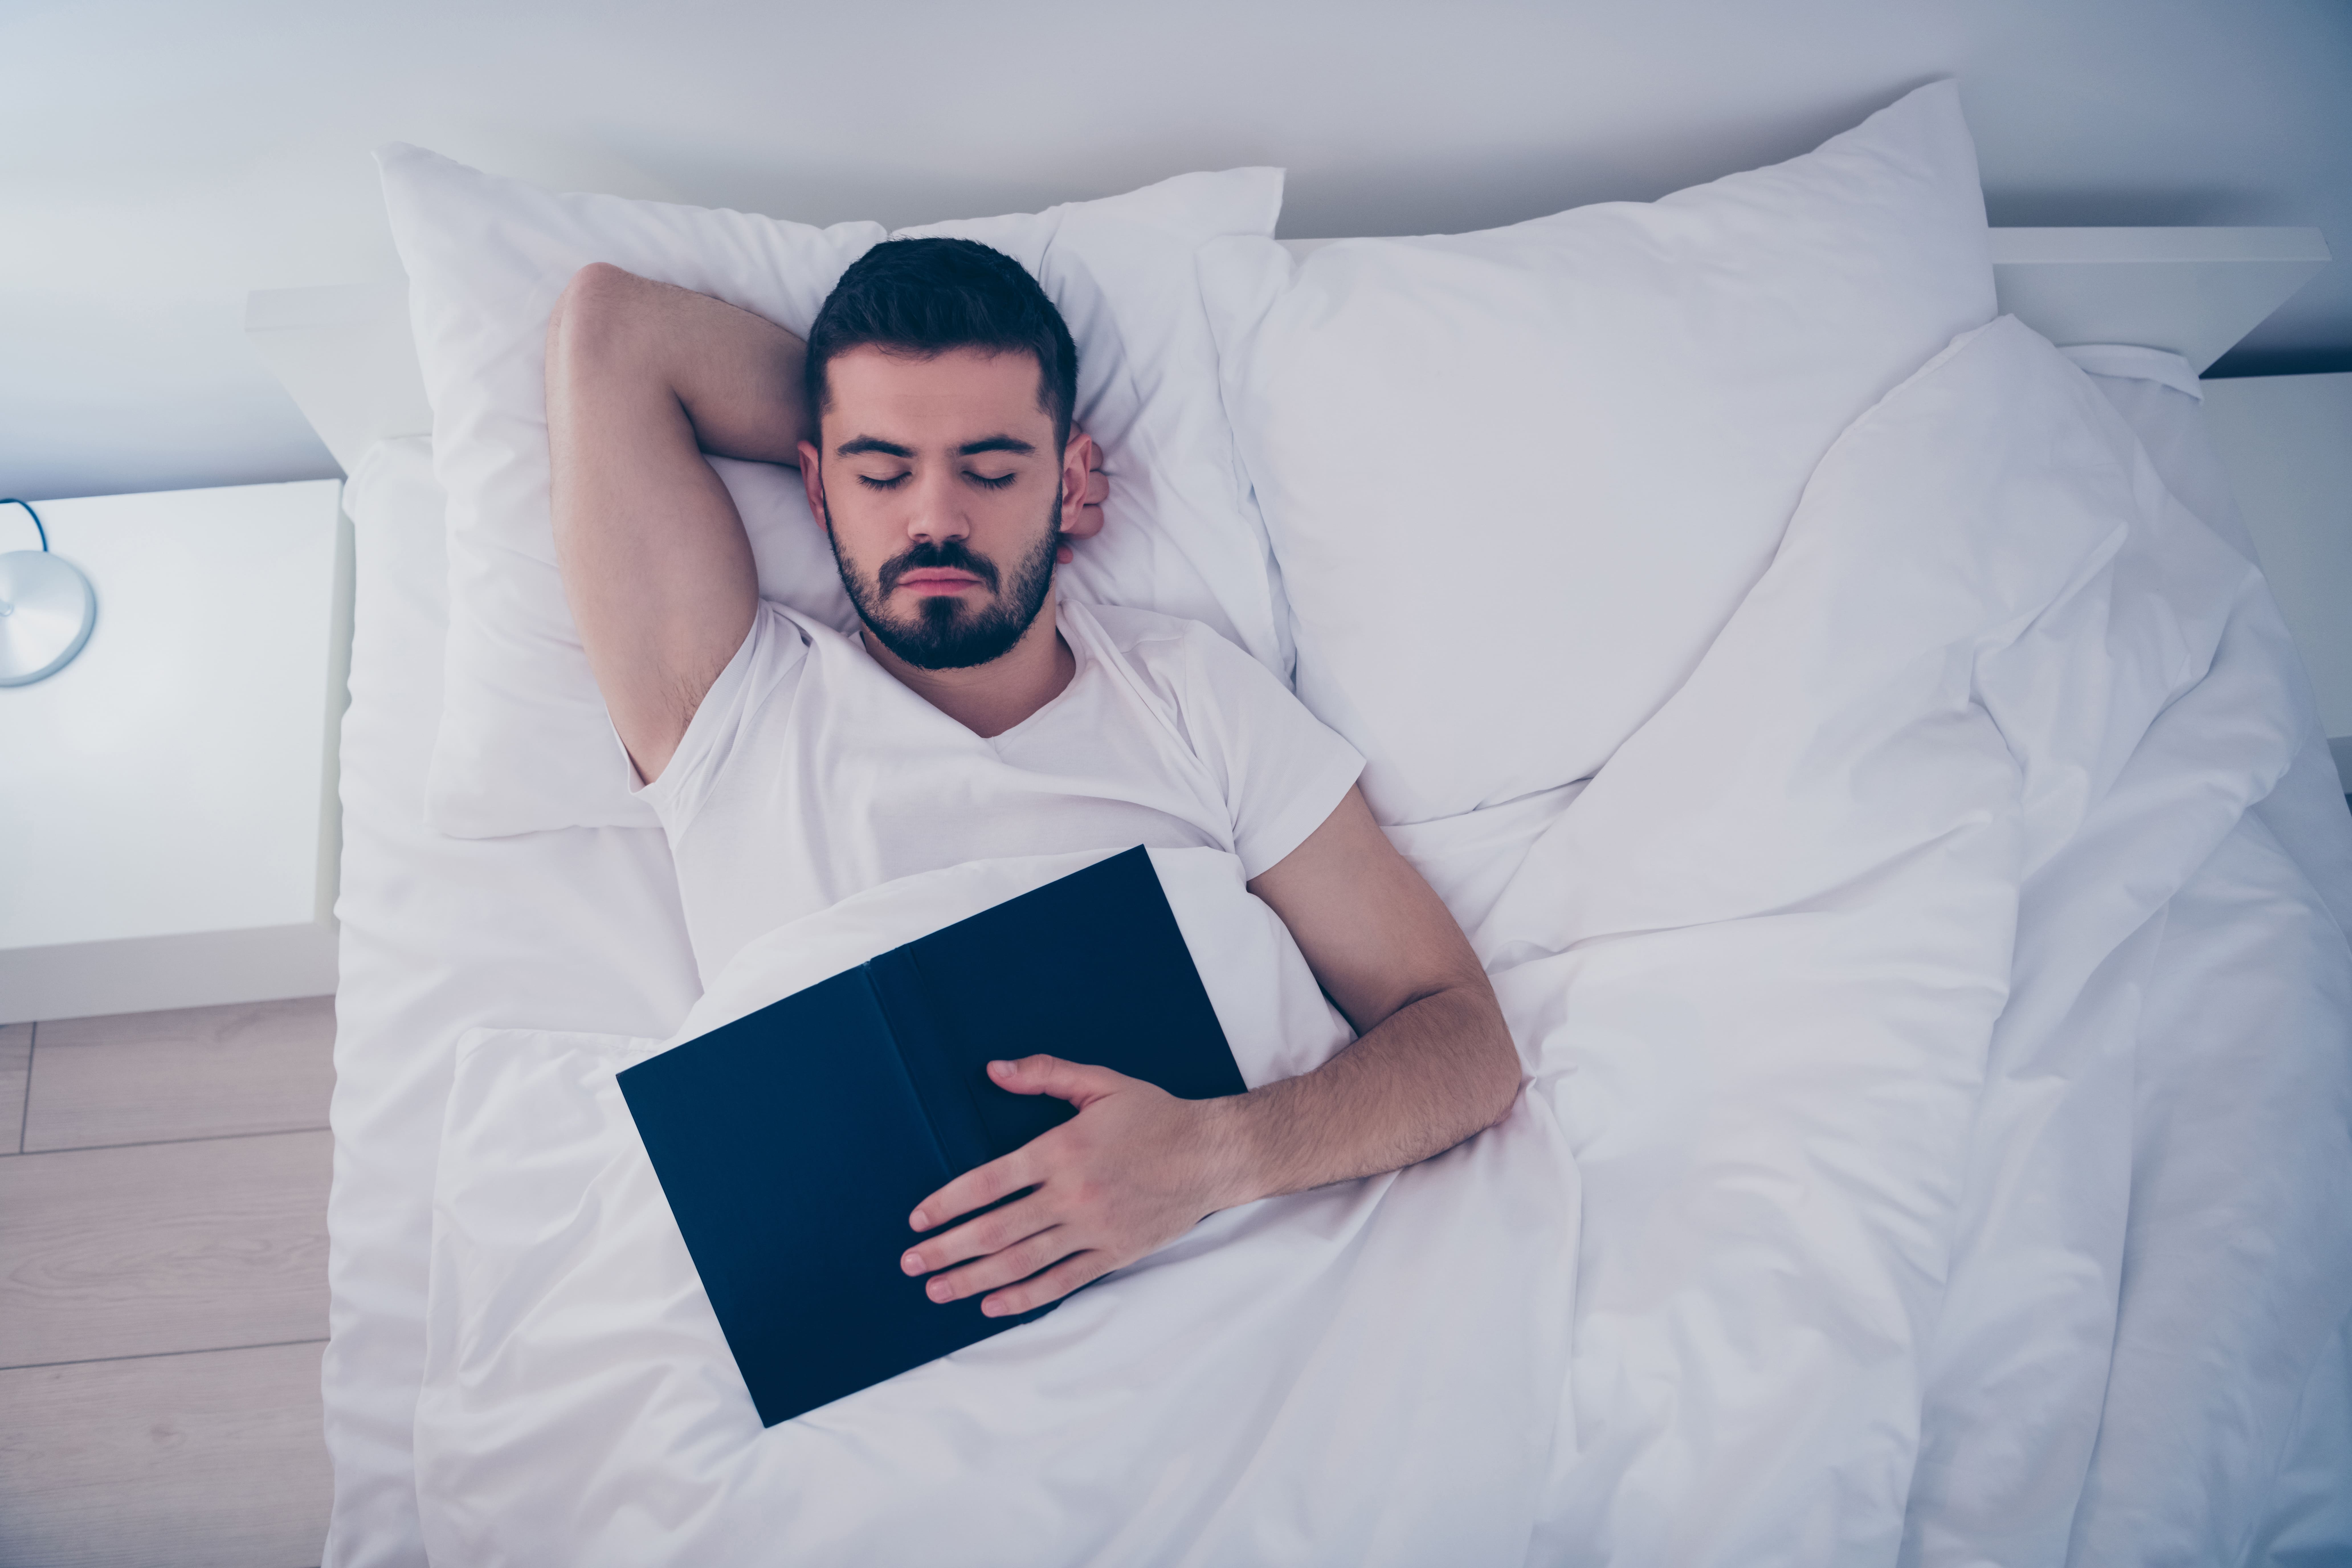 Man asleep in bed with an open book face down on his front.